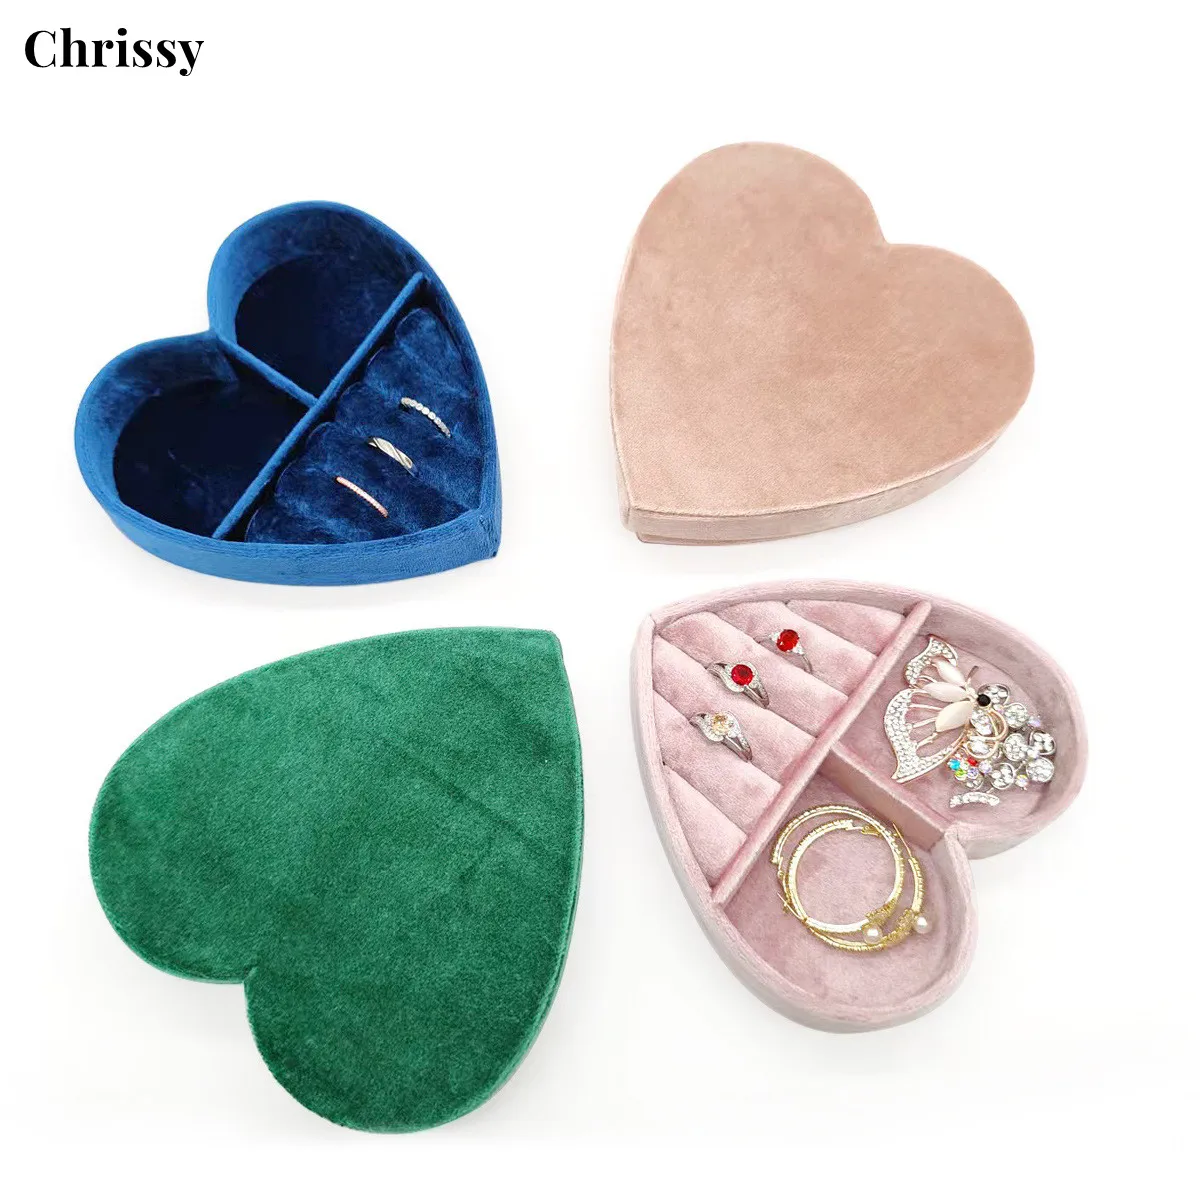 Velvet Heart Jewelry Storage Box Rings Earrings Necklace Display for Travel Portable Jewelry Organizer Box Women Girls Gift